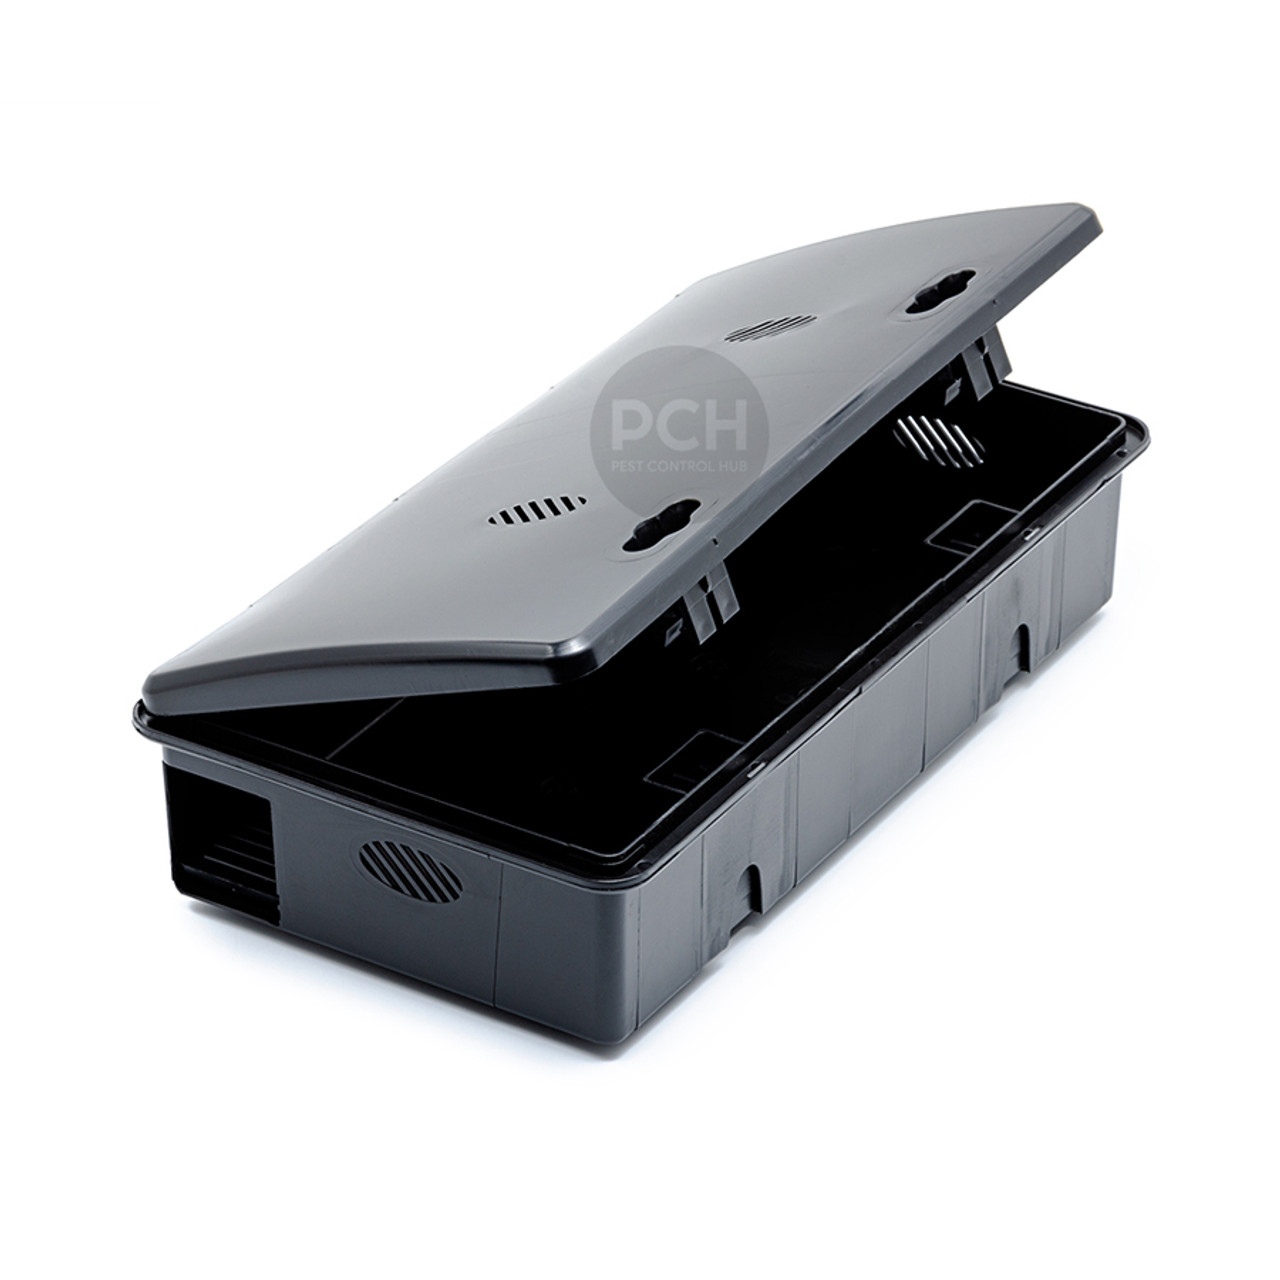 https://cdn11.bigcommerce.com/s-lmuttm1jiv/images/stencil/1280x1280/products/310/1077/Mastertrap_MPS_Self_Setting_Multi_Catch_Mouse_Bait_Station_with_Snap_Traps_View_Black__91228.1564701843.jpg?c=2?imbypass=on